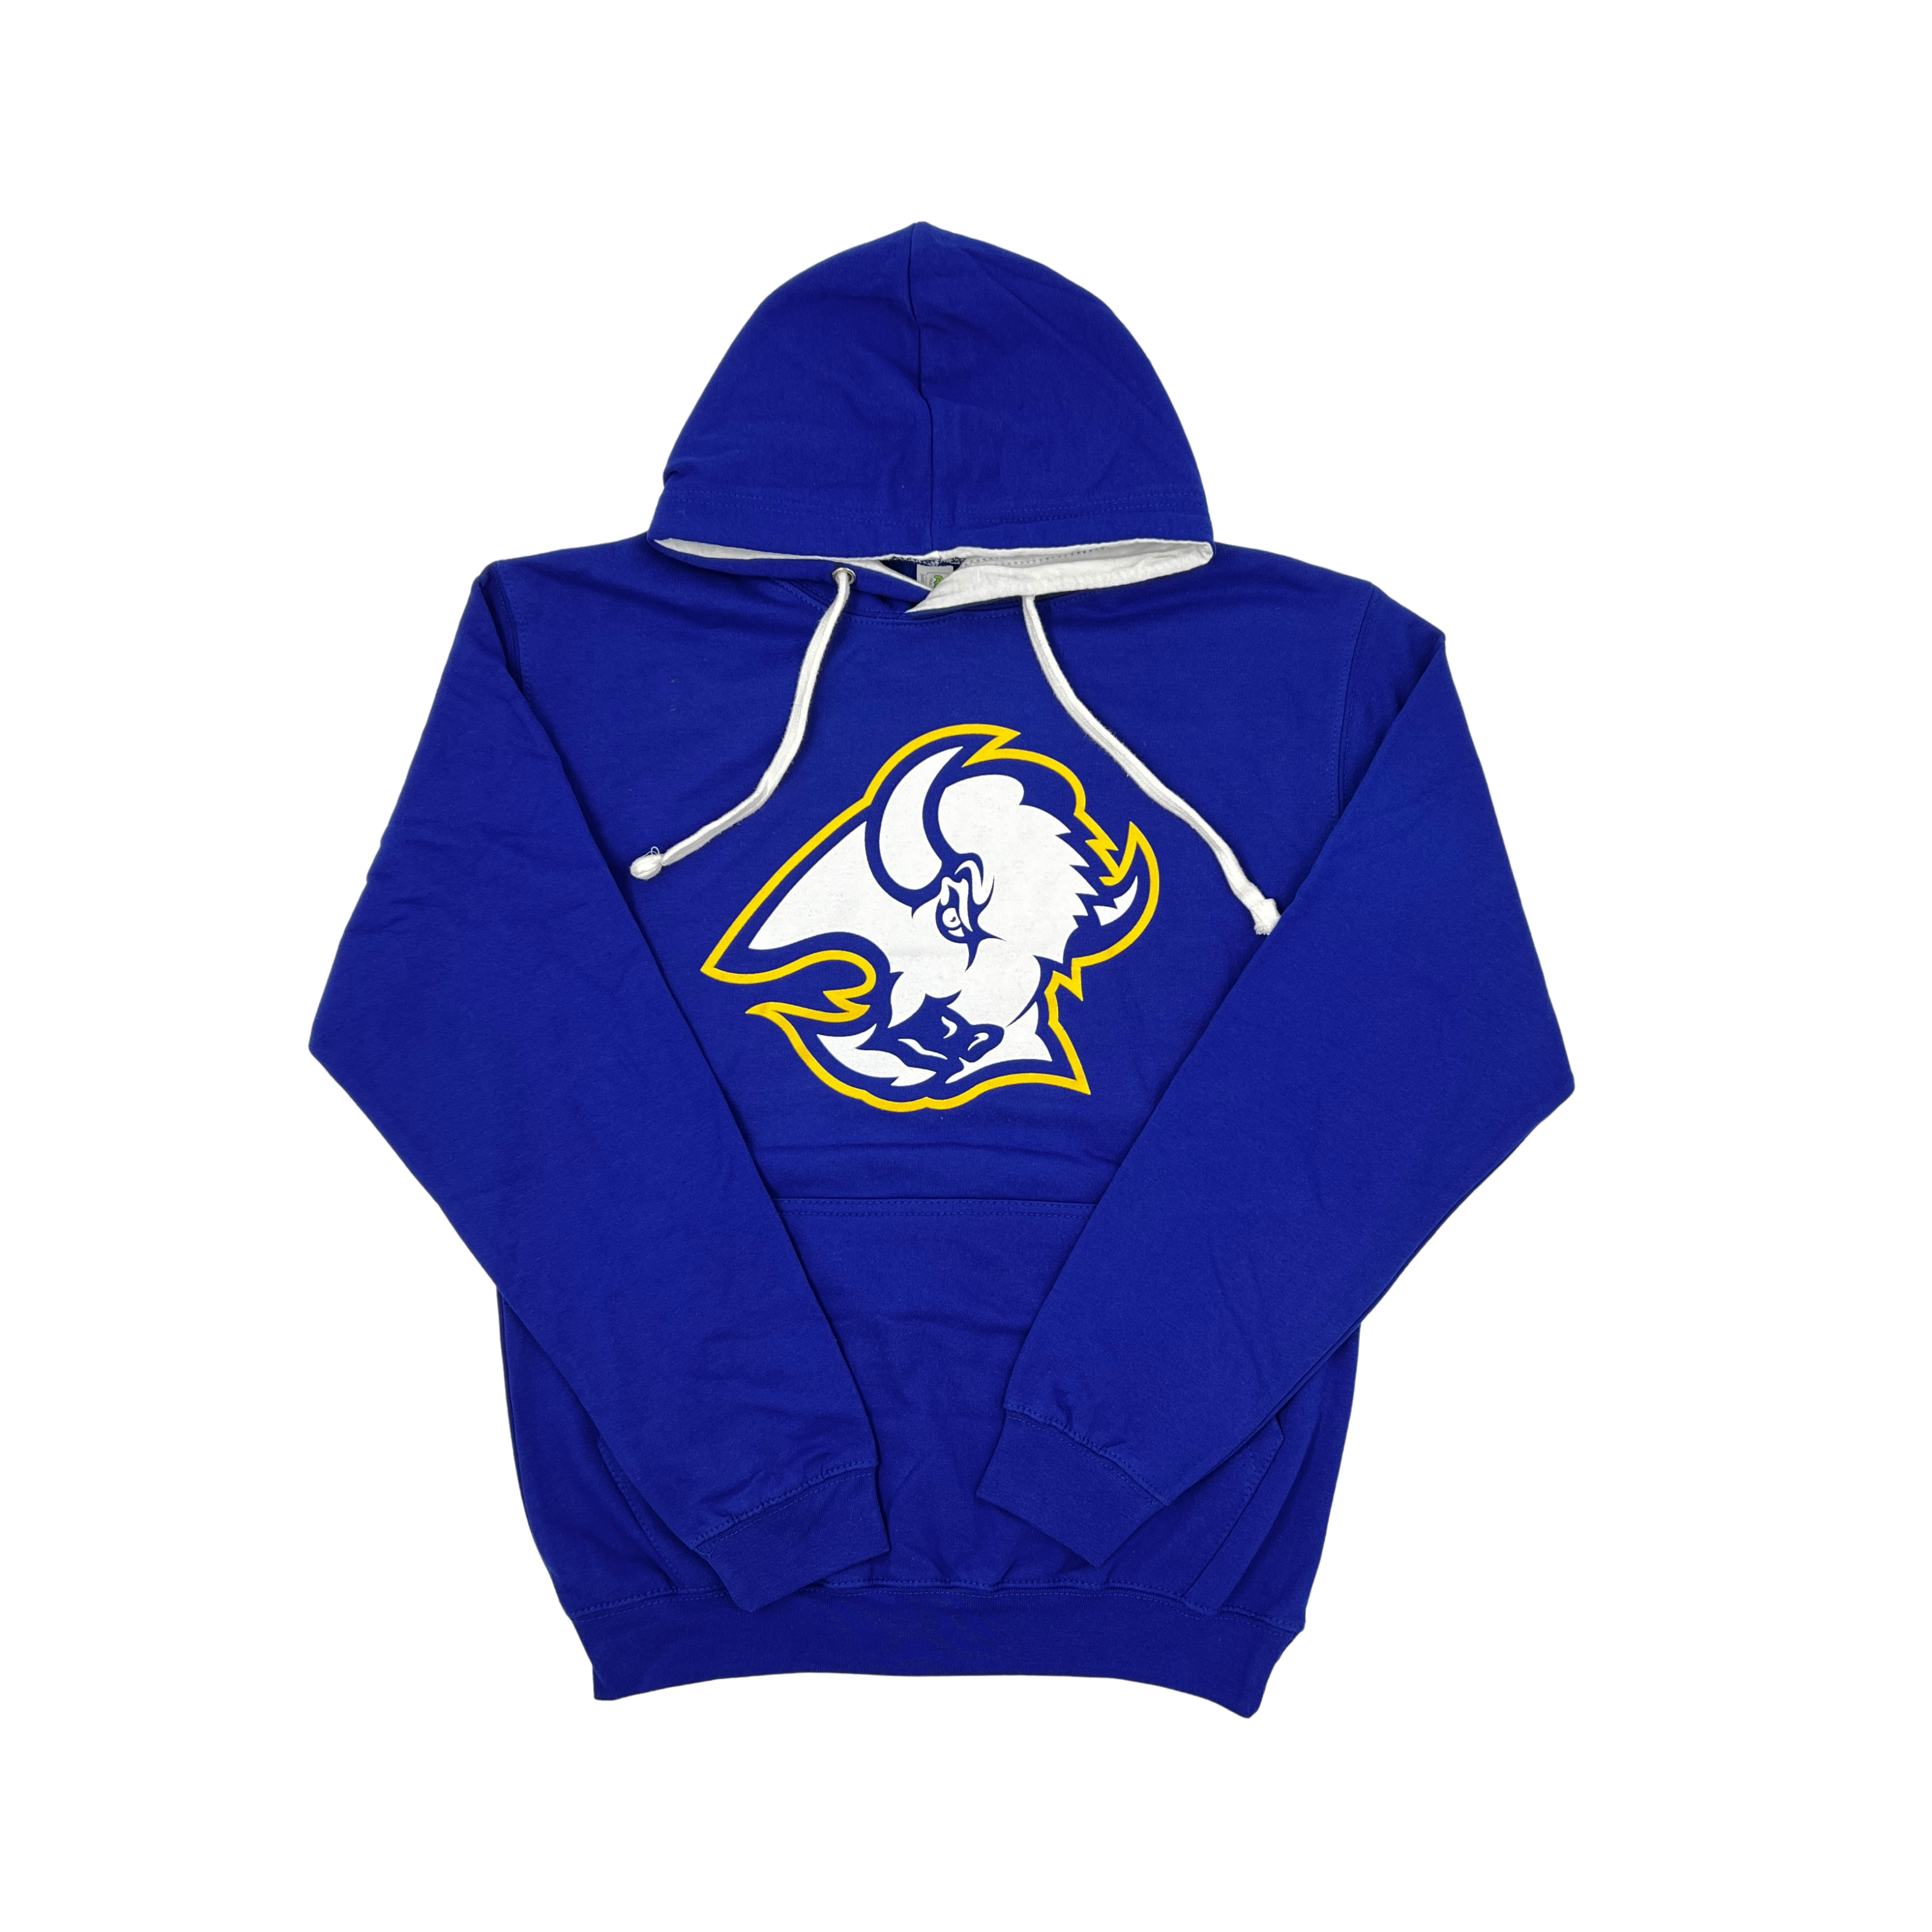 BEST NHL Buffalo Sabres Special Reverse Retro Redesign 3D Hoodie